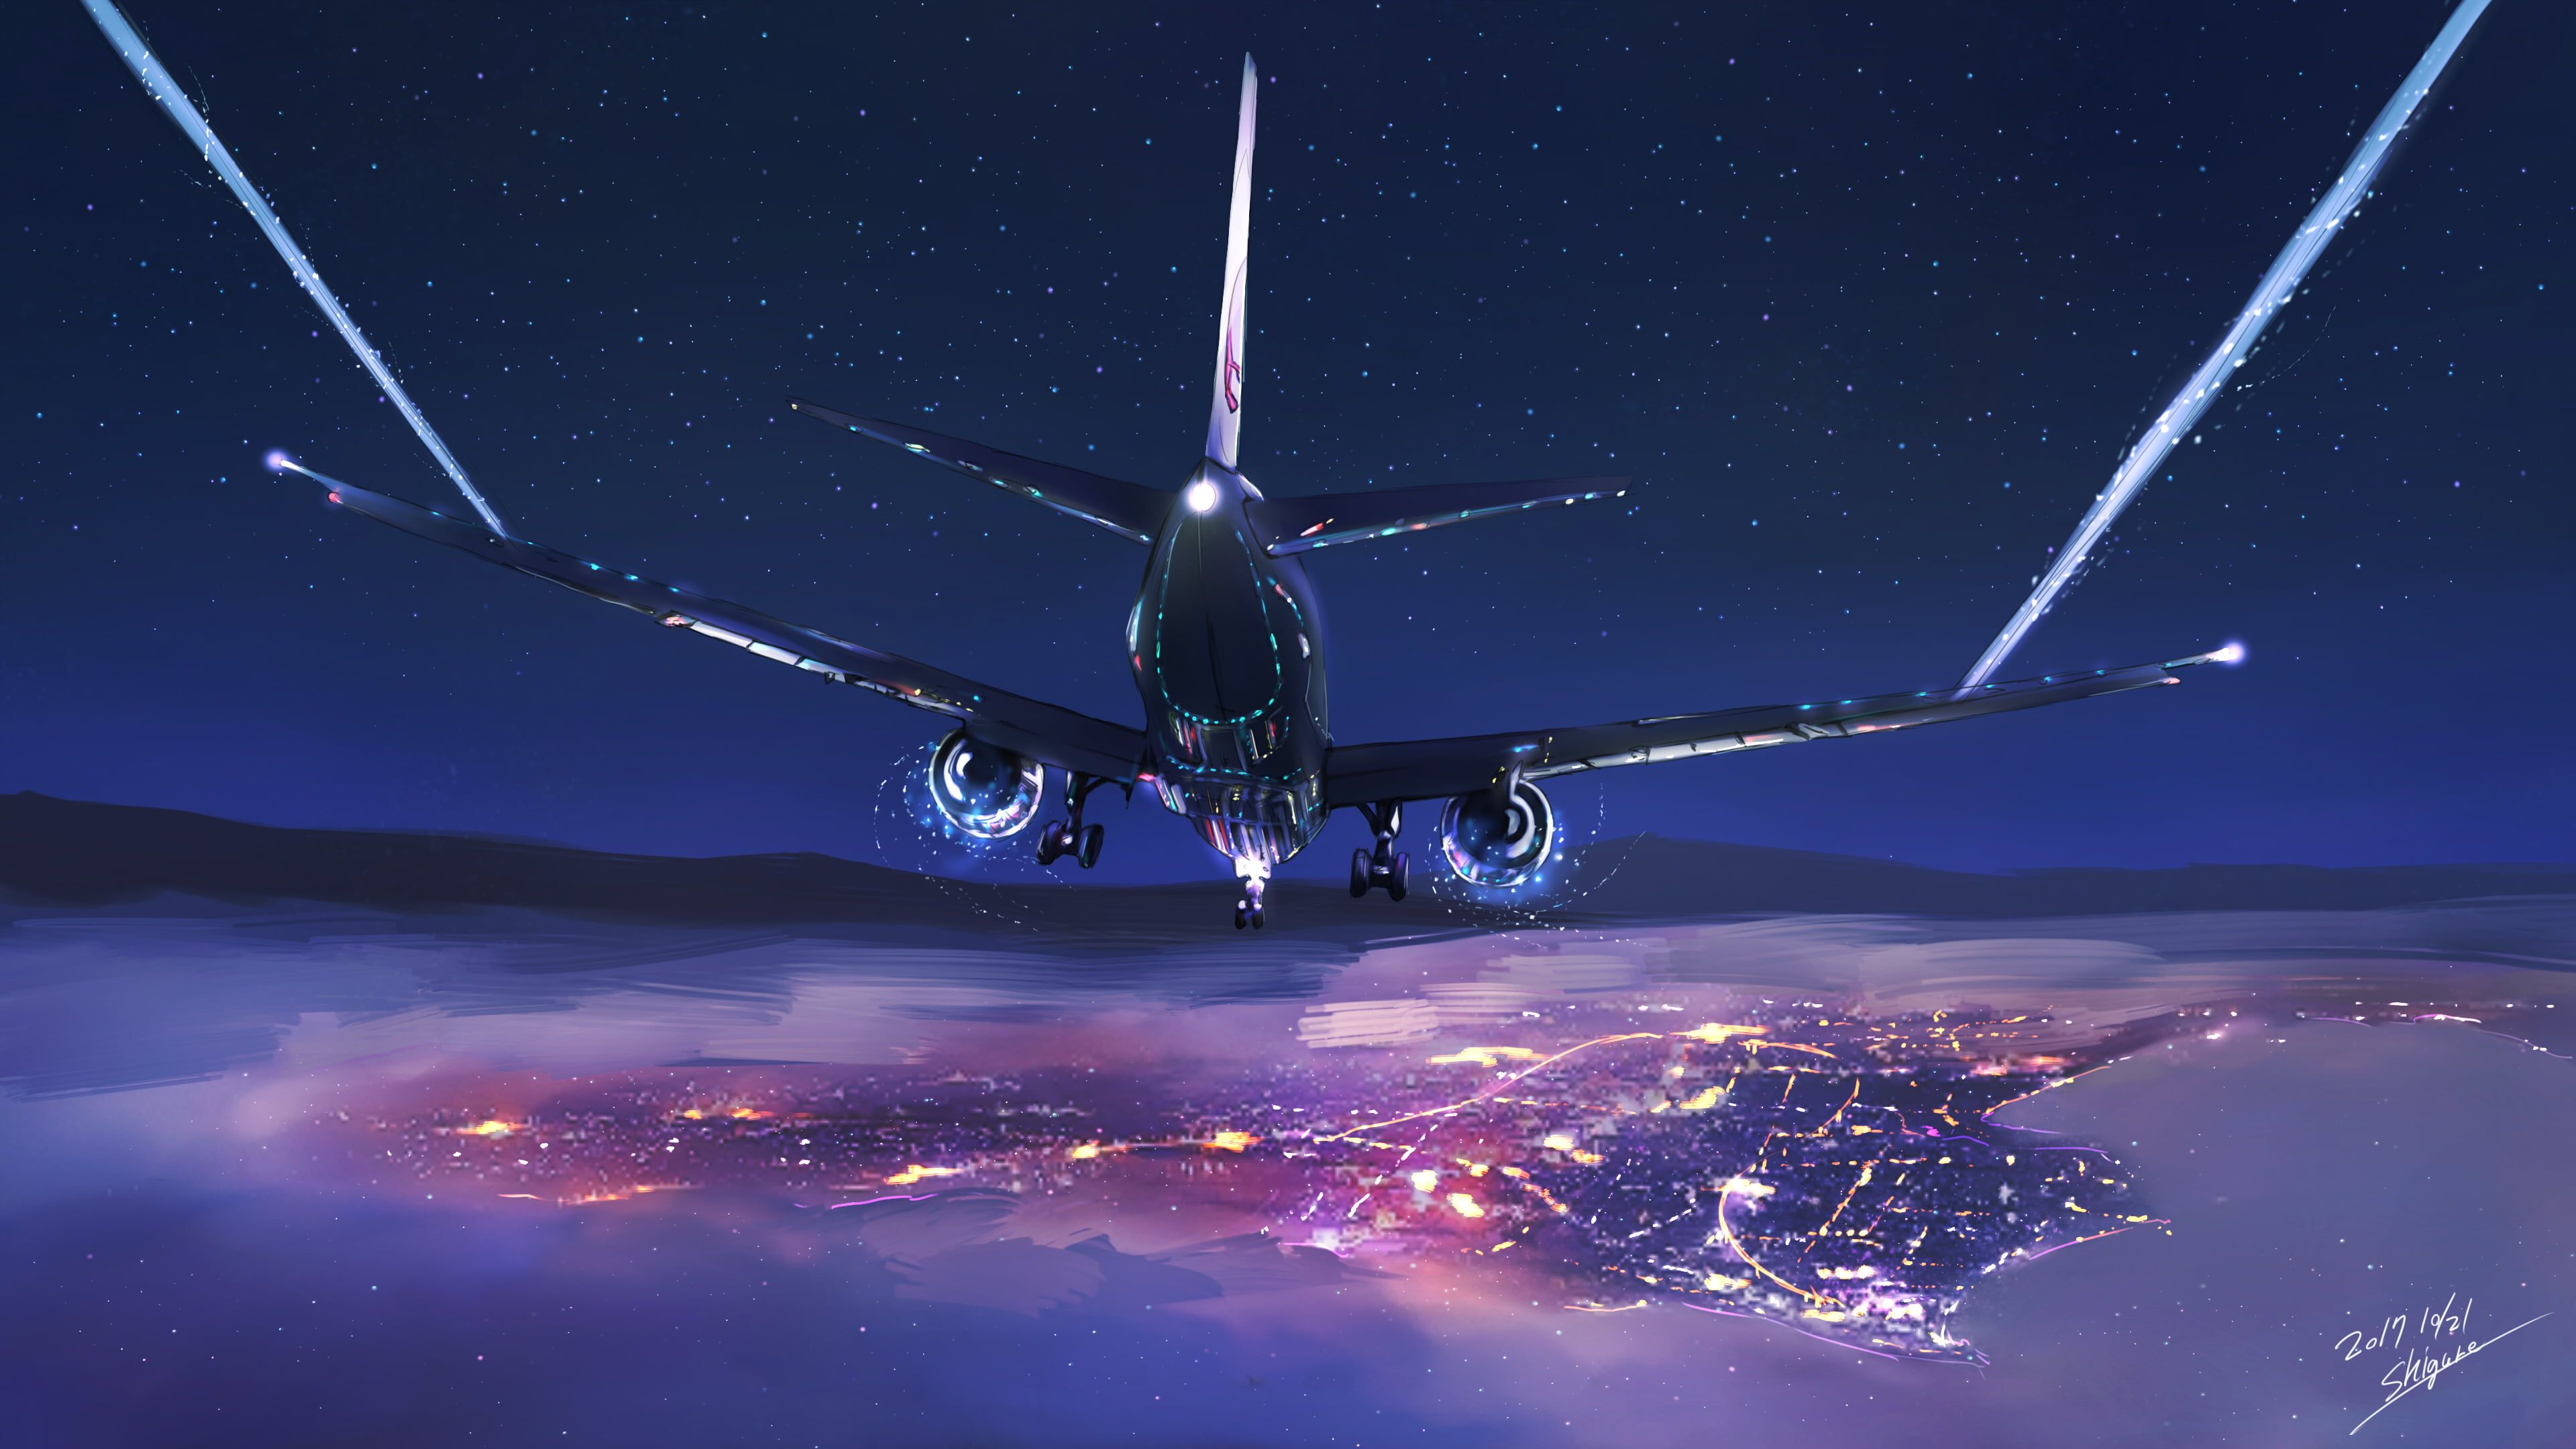 Black and gray airplane illustration planes city clouds sky mountains city lights stars night draâ airplane illustration airplane wallpaper hd wallpaper